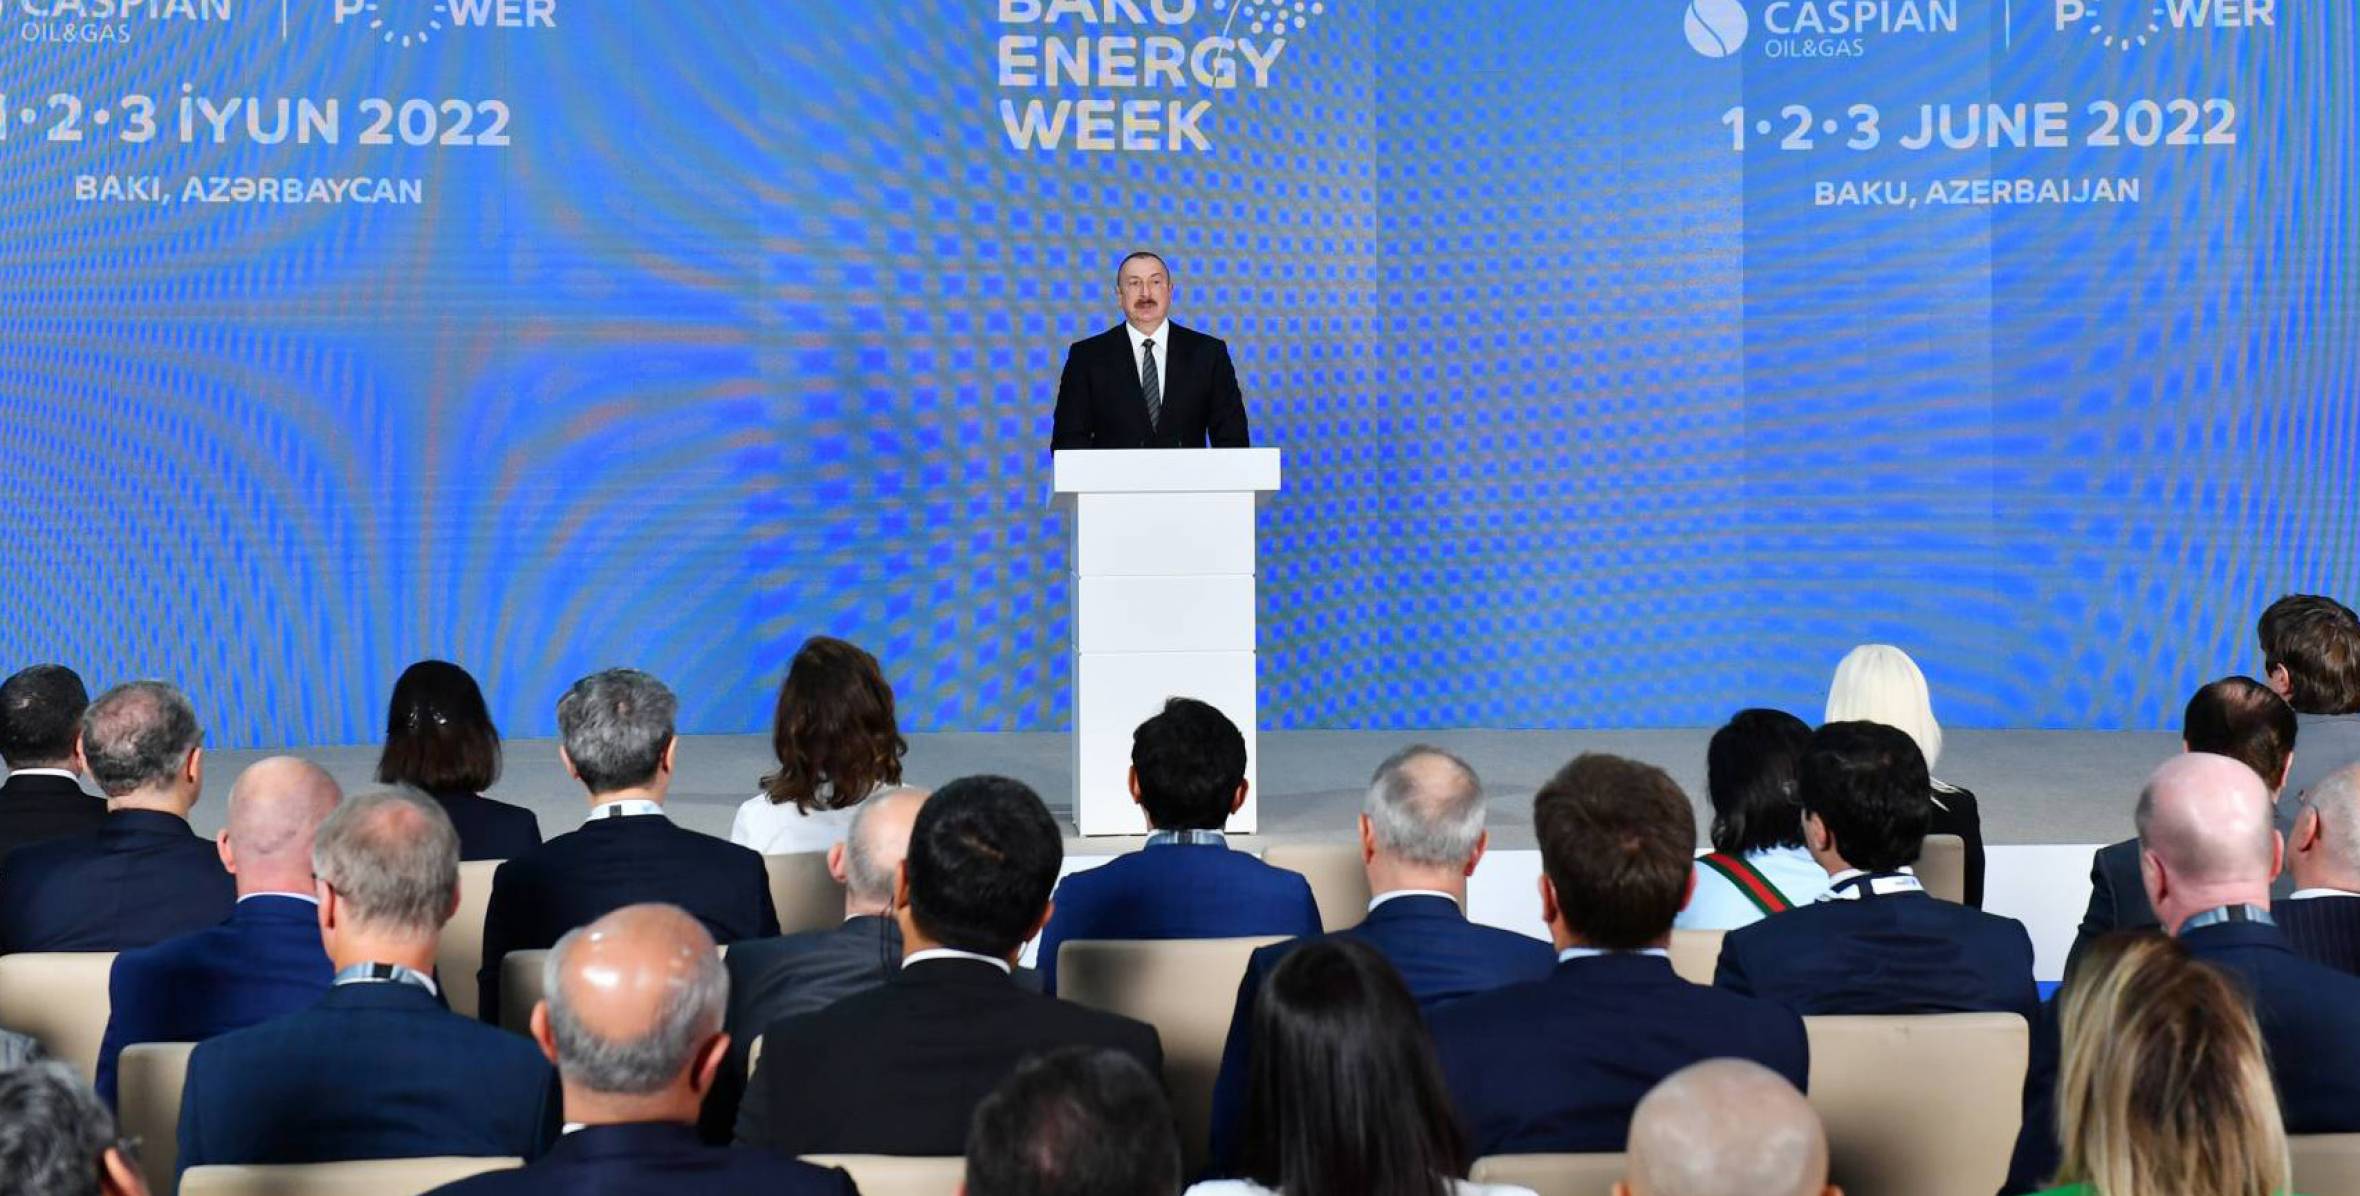 Speech by Ilham Aliyev at the official opening ceremony of 27th International Caspian Oil & Gas Exhibition on the sidelines of Baku Energy Week